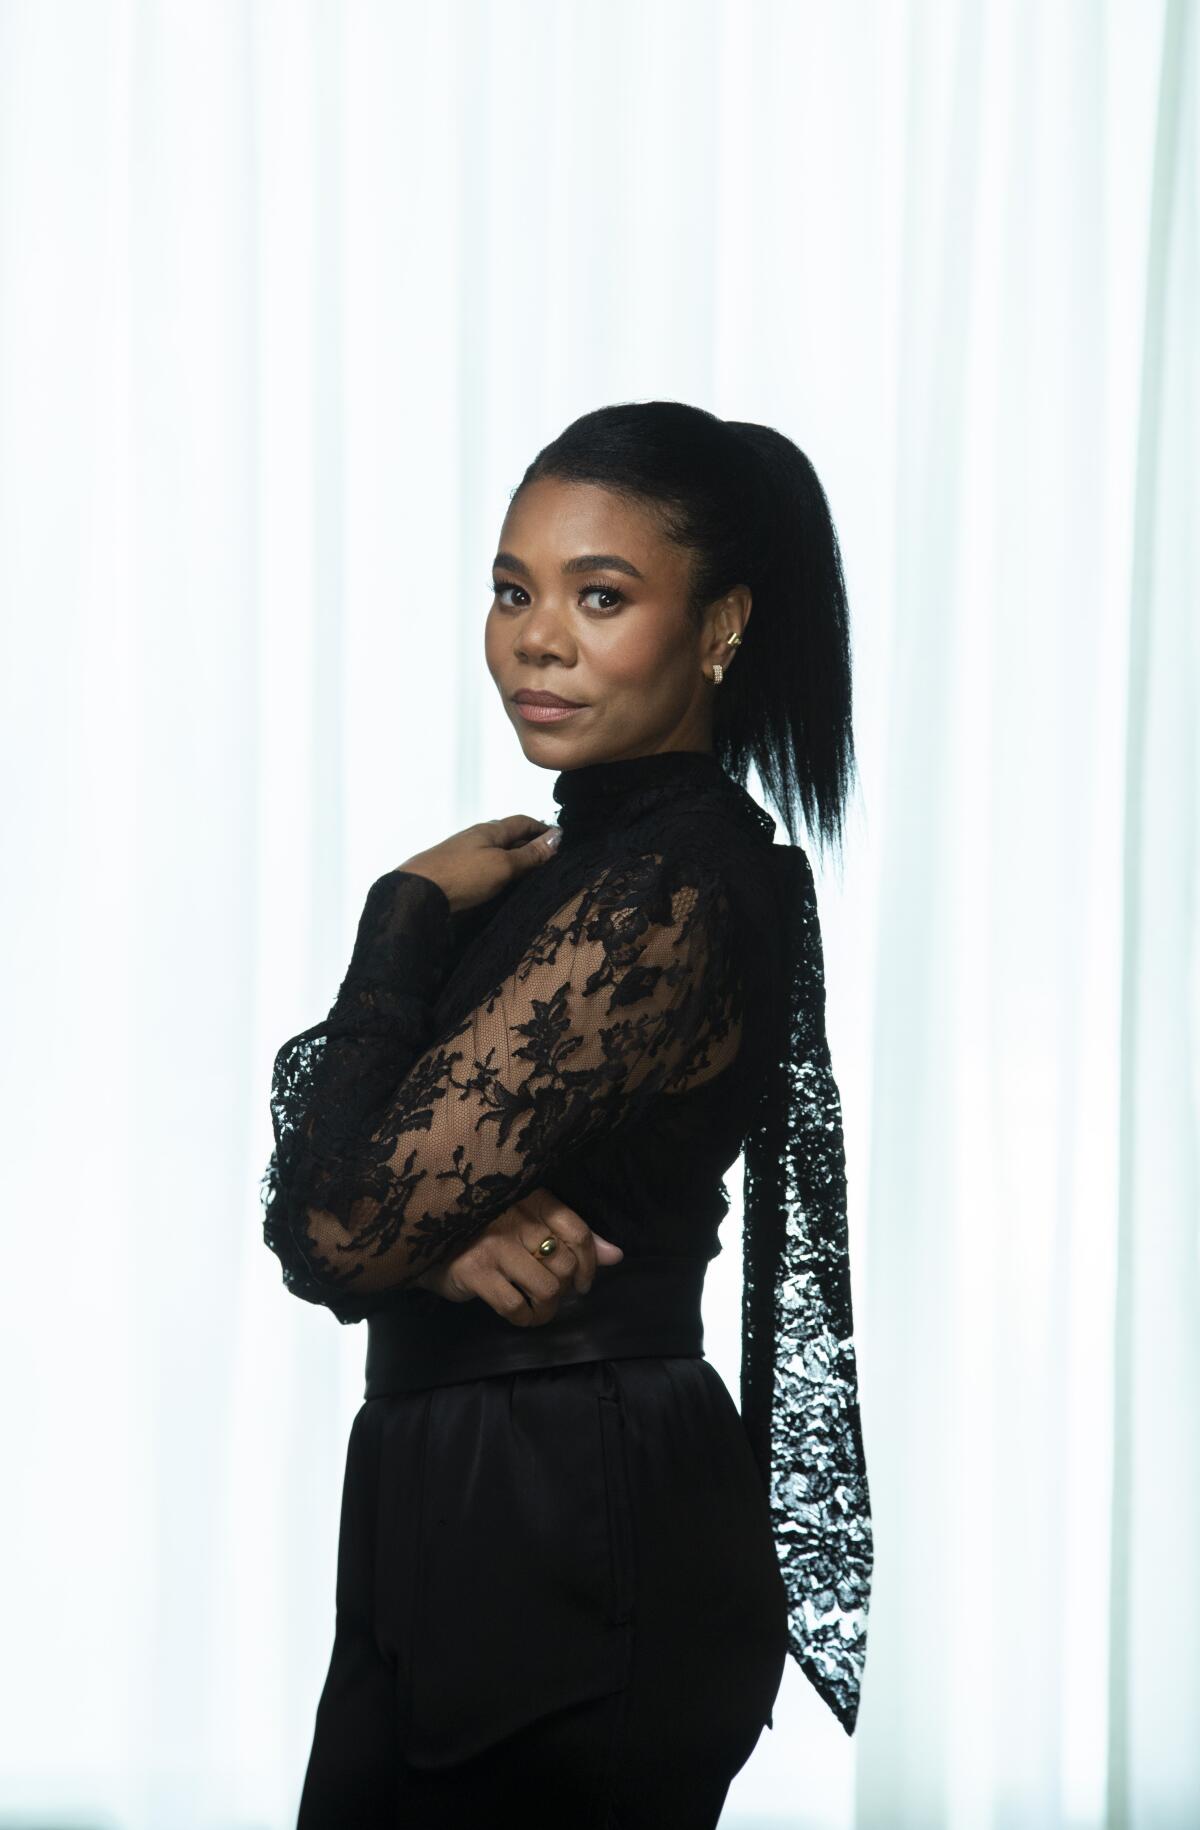 Regina Hall poses for a portrait in a lacy black outfit